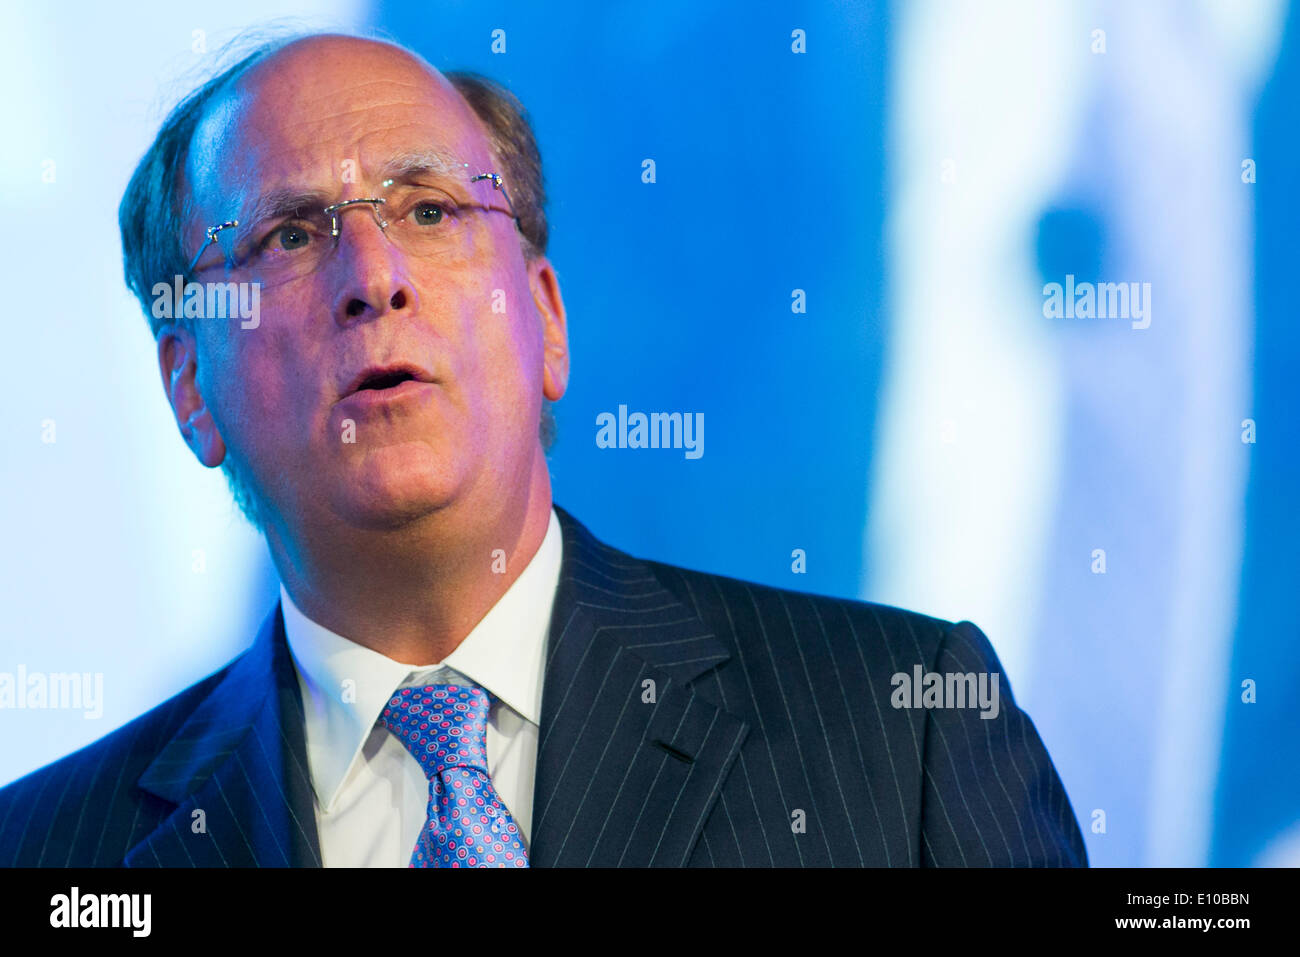 Washington DC, USA. 20th May 2014. Laurence D. Fink, Chairman and CEO of BlackRock, speaks during the General Membership Meeting of the Investment Company Institute in Washington, D.C. on May 20, 2014. Credit:  Kristoffer Tripplaar/Alamy Live News Stock Photo